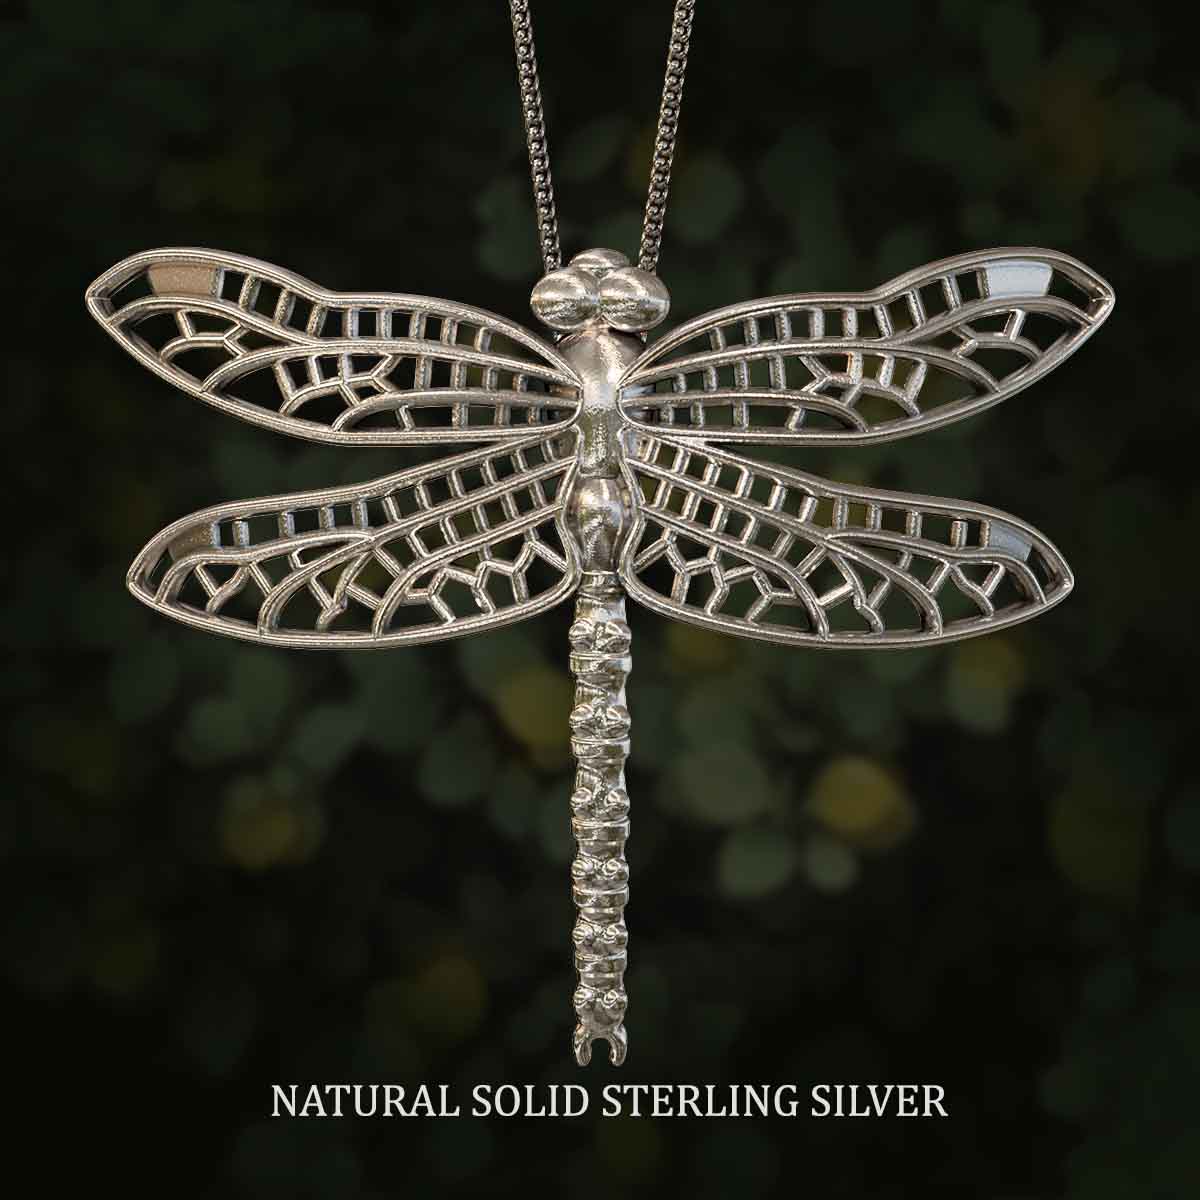 Natural-Satin-Polish-Solid-Sterling-Silver-Dragonfly-Pendant-Jewelry-For-Necklace